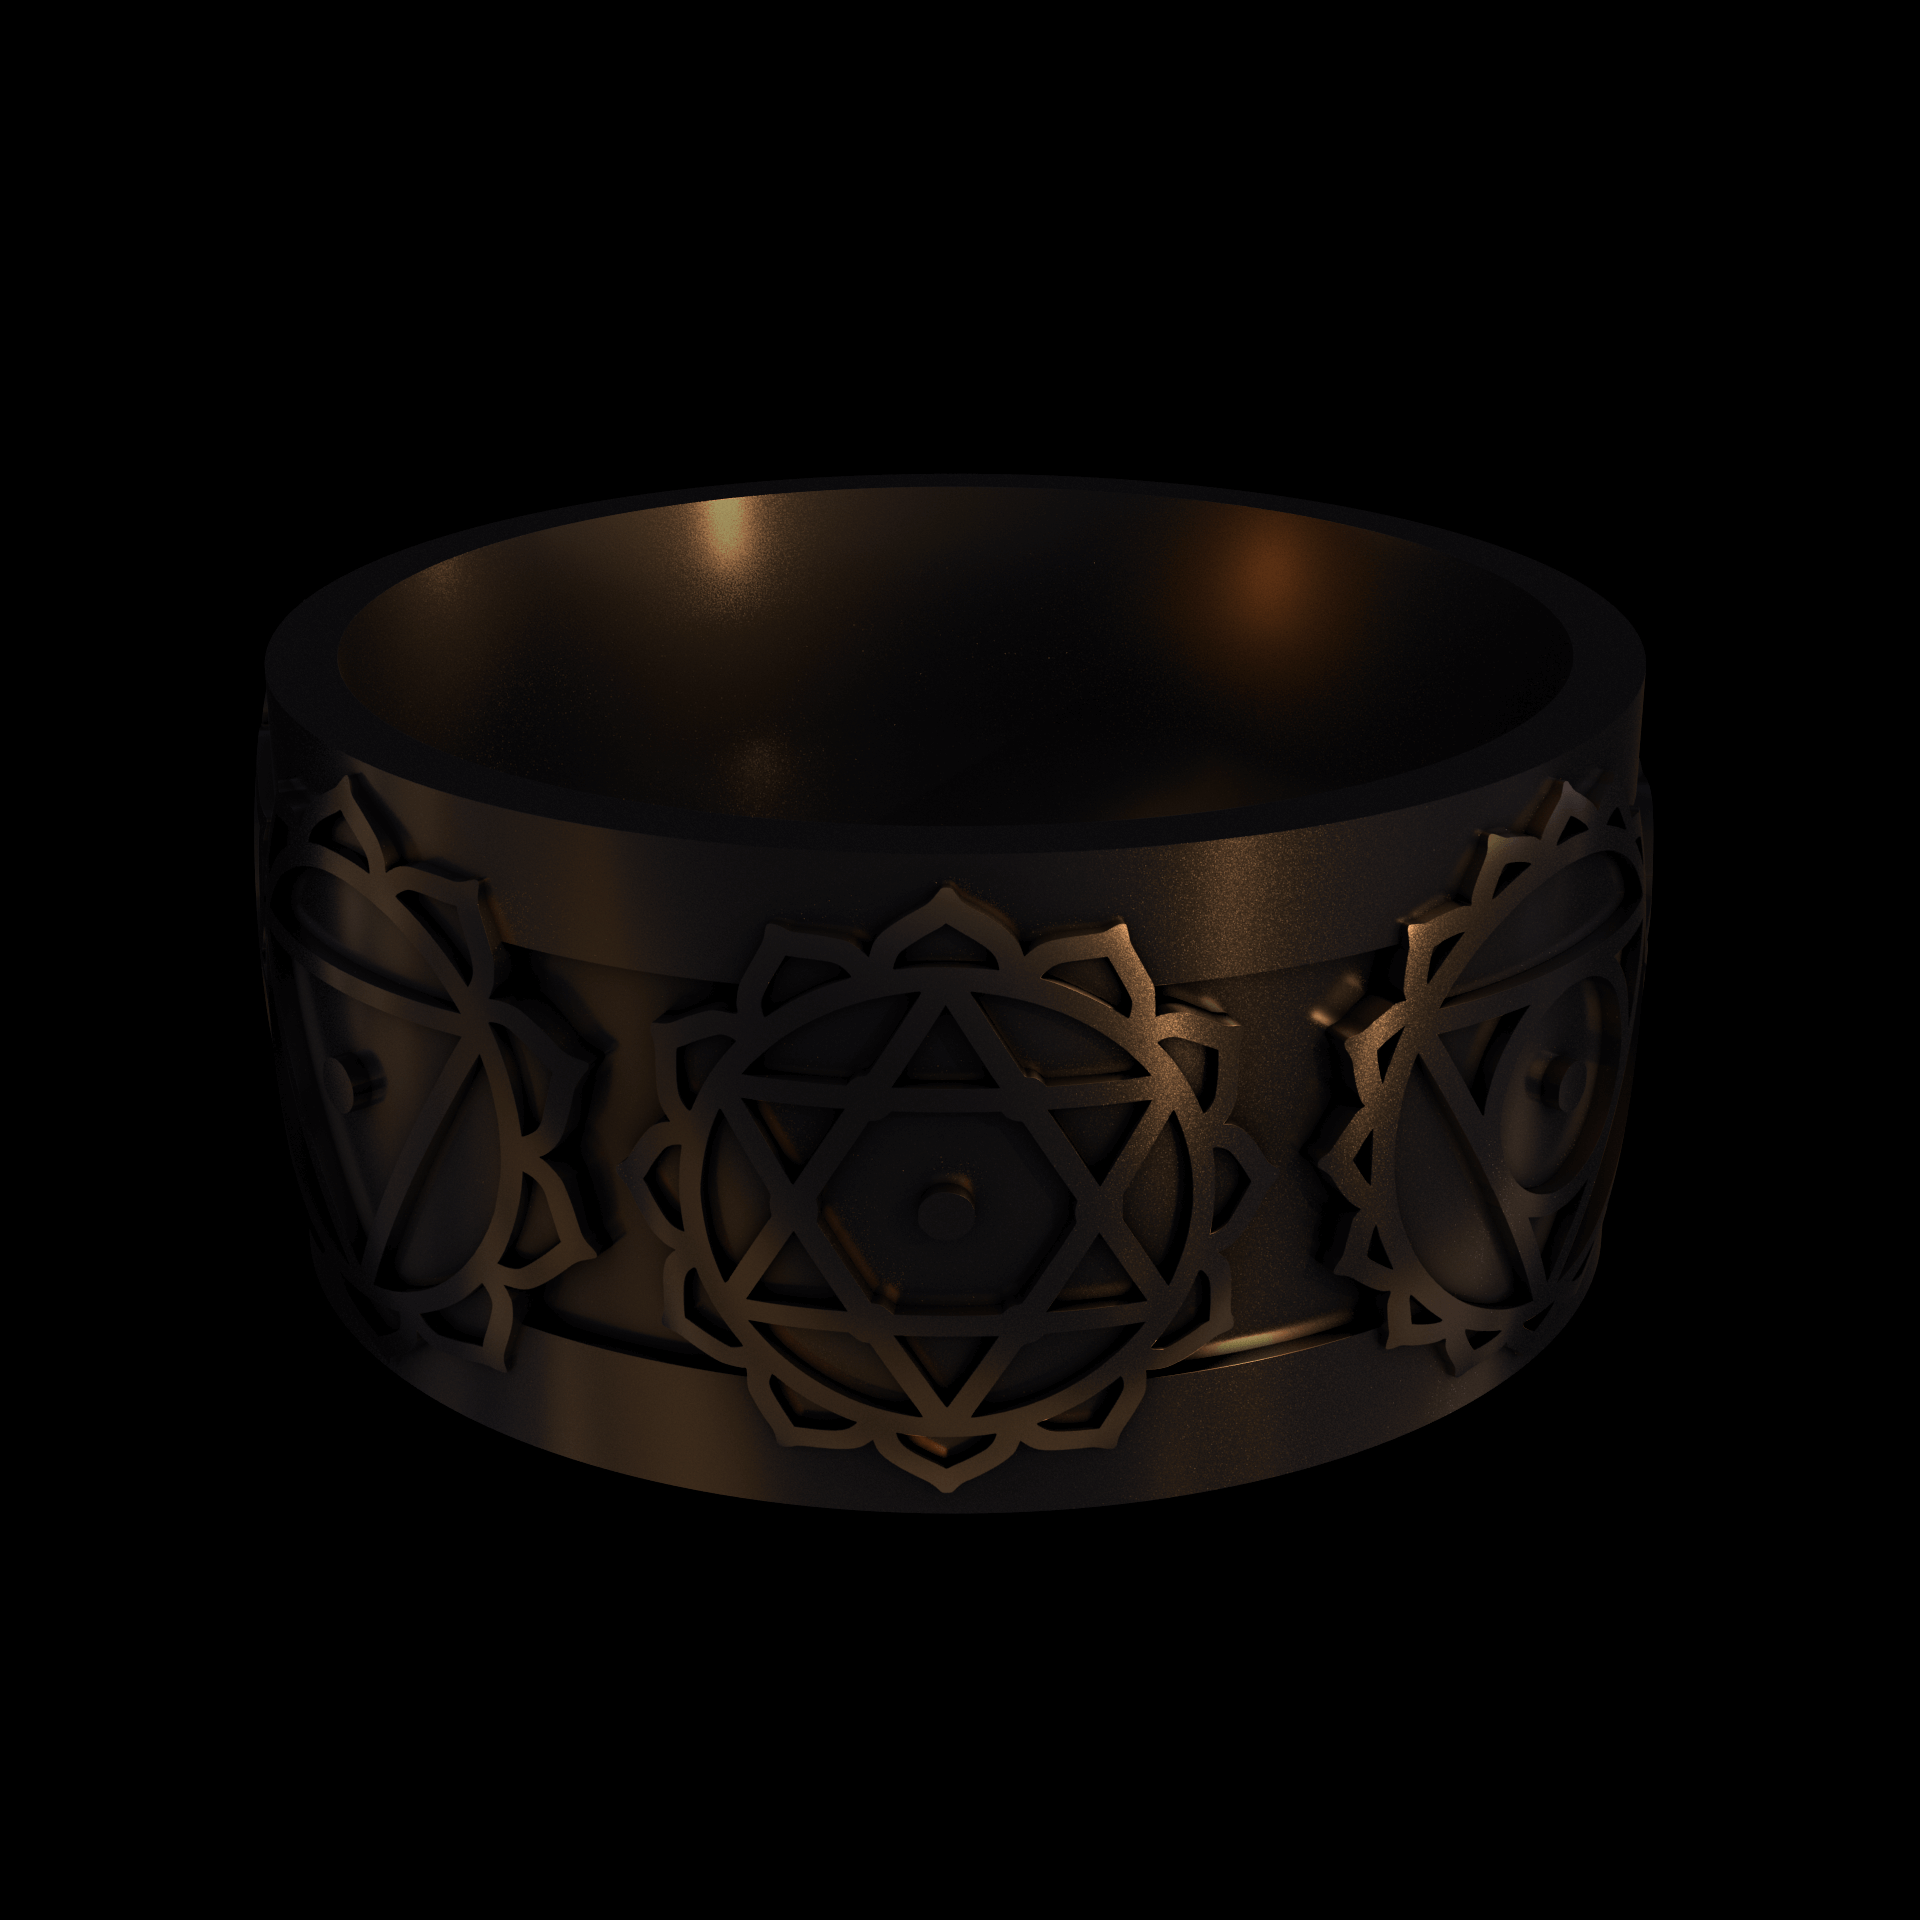 Bronze infused 420 stainless steel, manufactured using 3D printing, polished and enrobed in 24k gold with a mild sheen, with visible print lines.